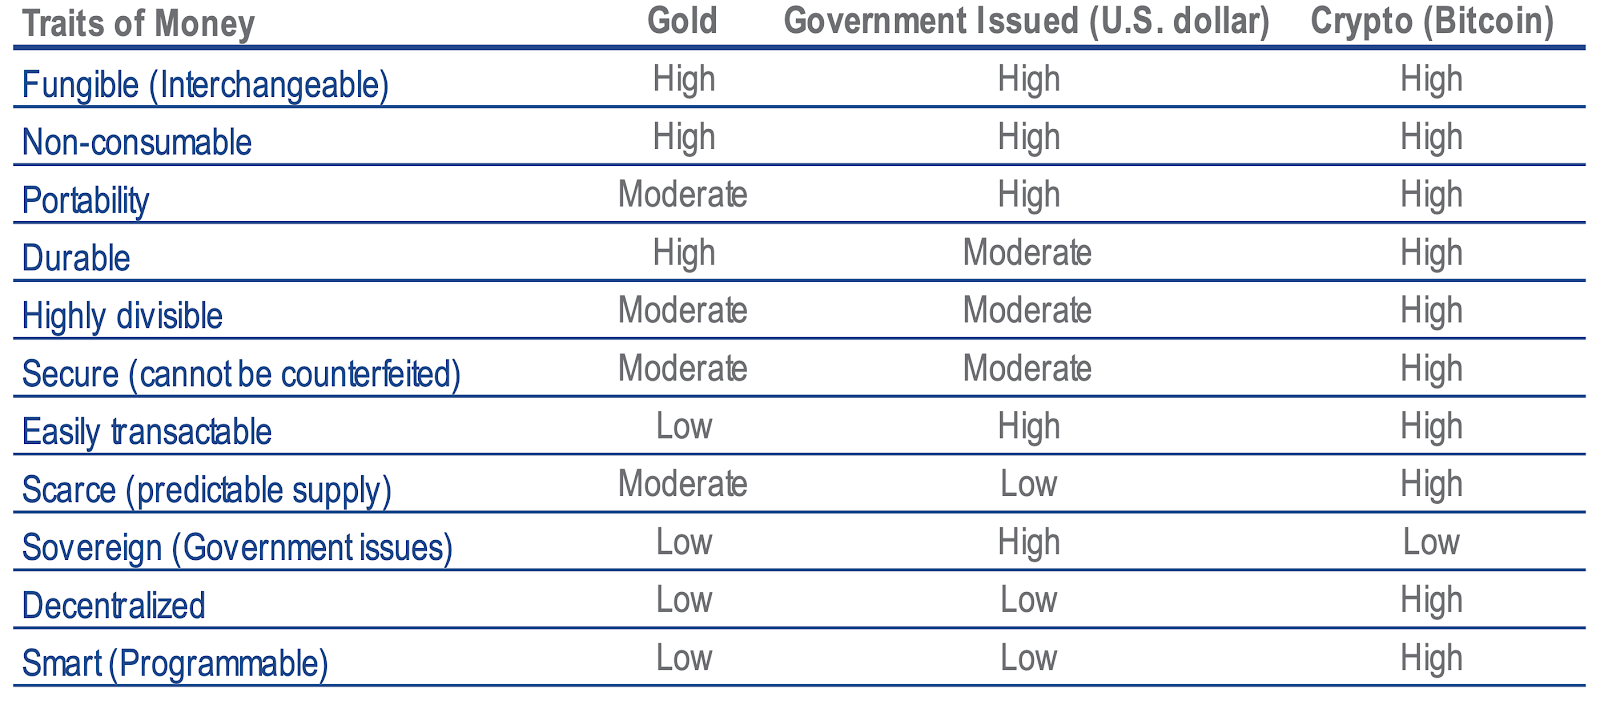 Comparison of the traits of money of Gold, United States dollars and Bitcoin